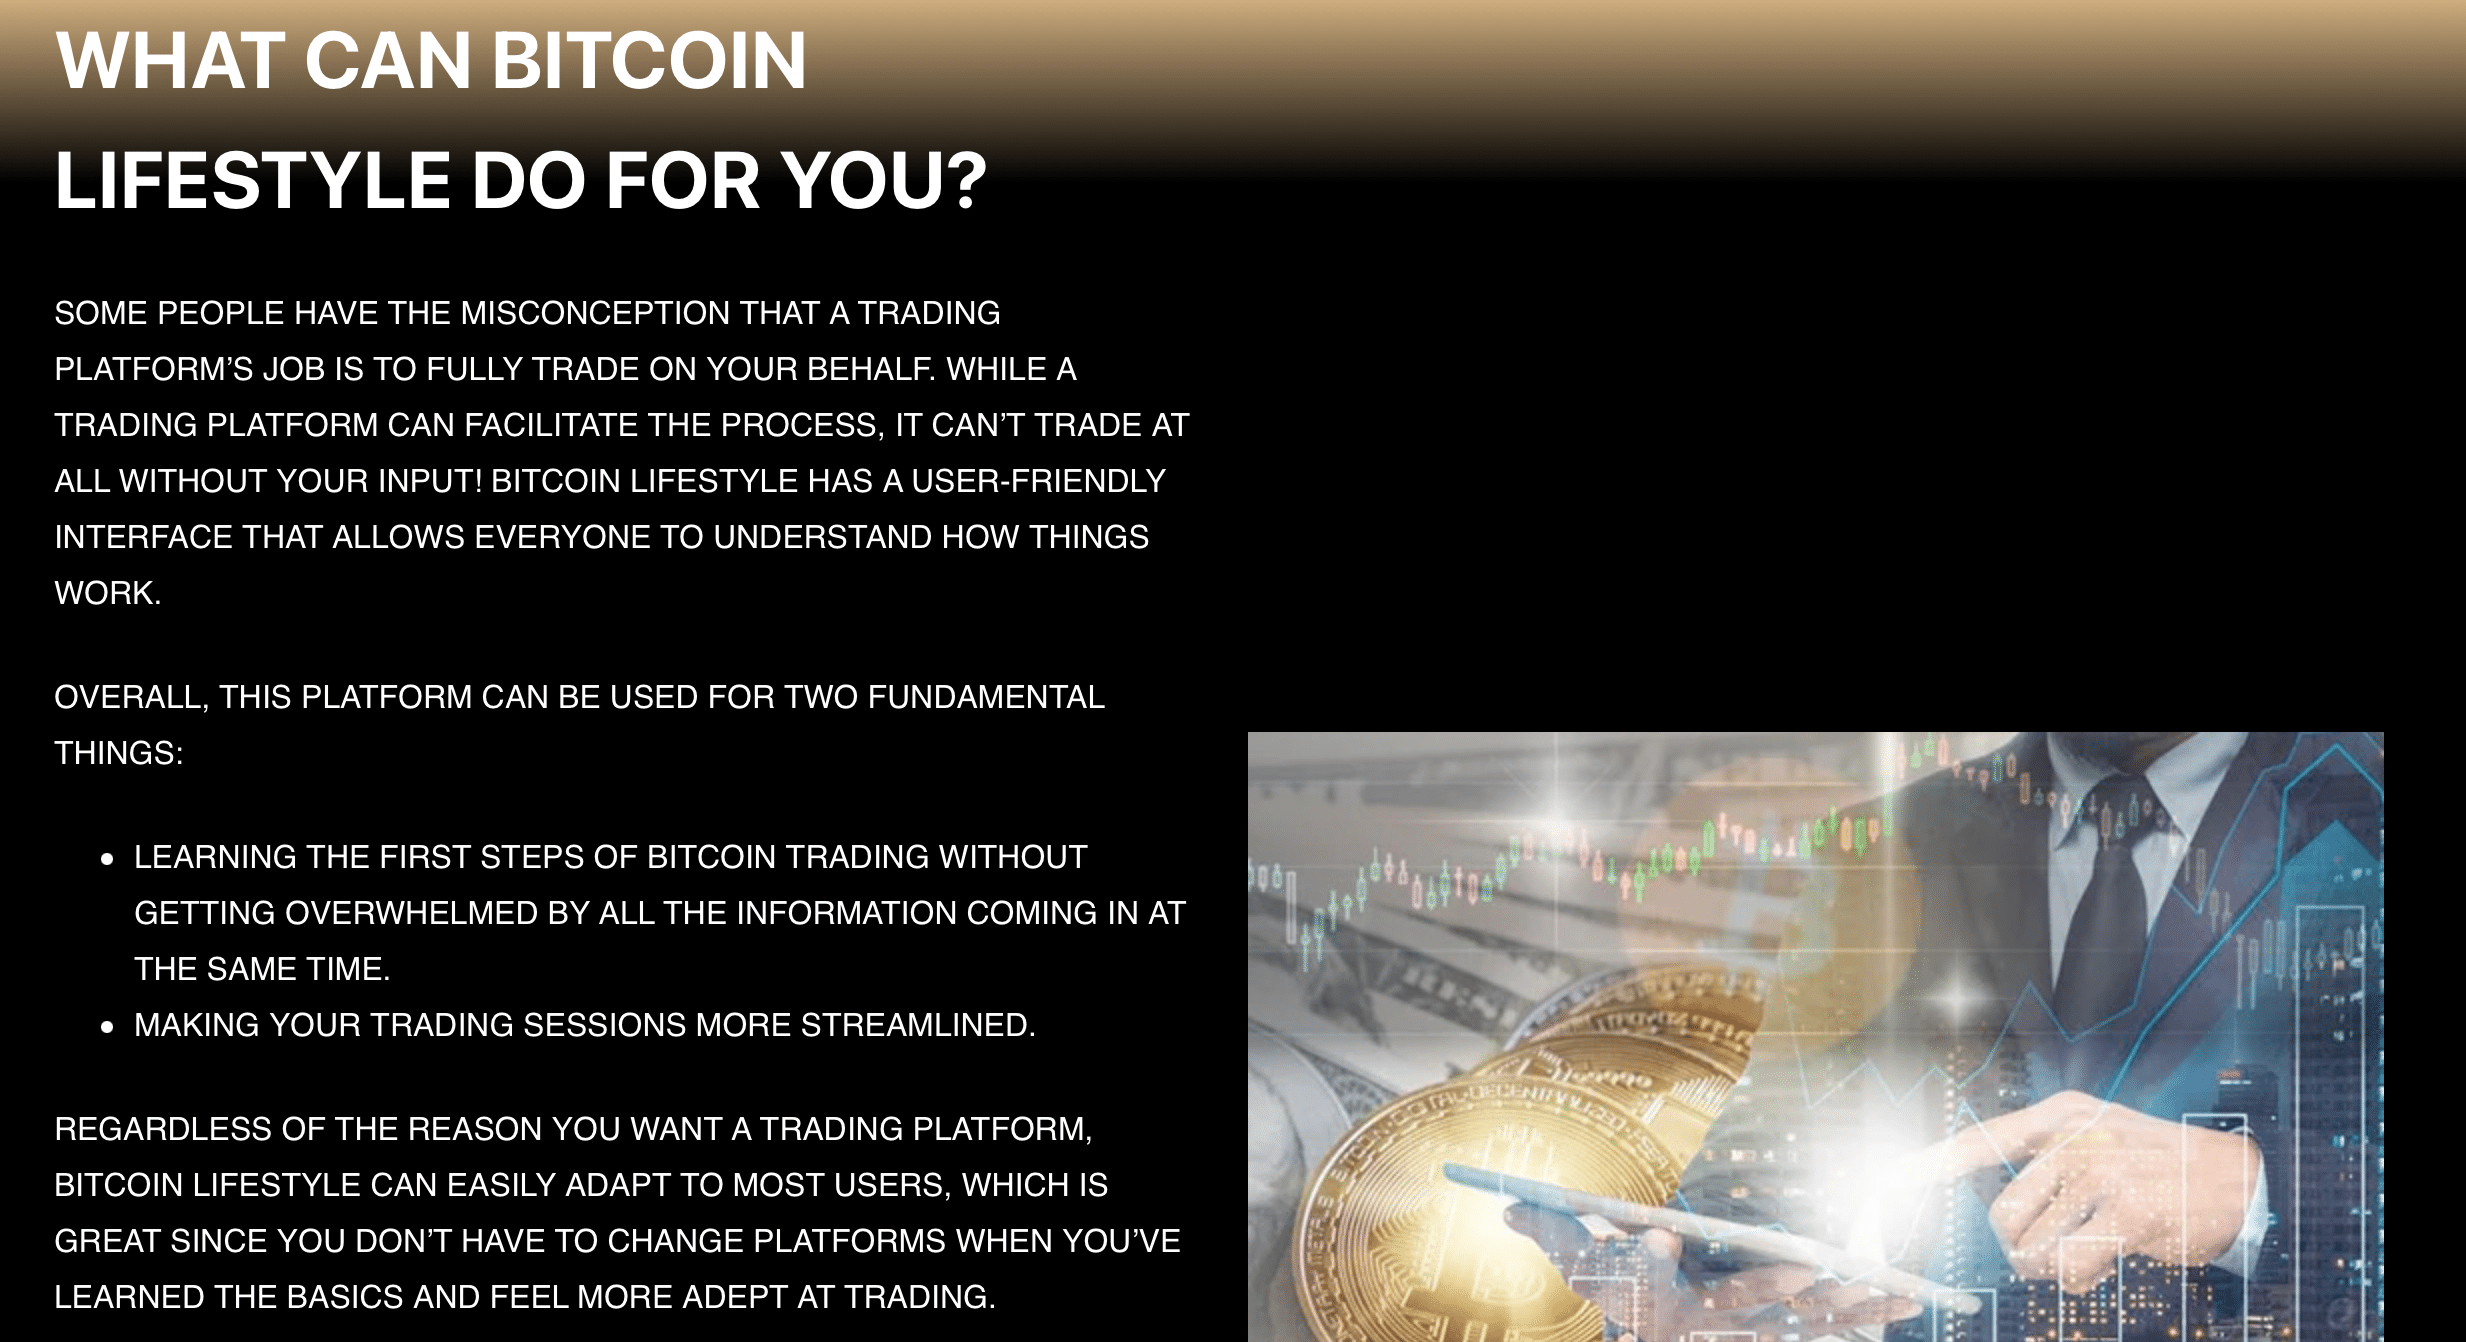 Bitcoin Lifesstyle official website, What can Bitcoin Lifestyle do for you section